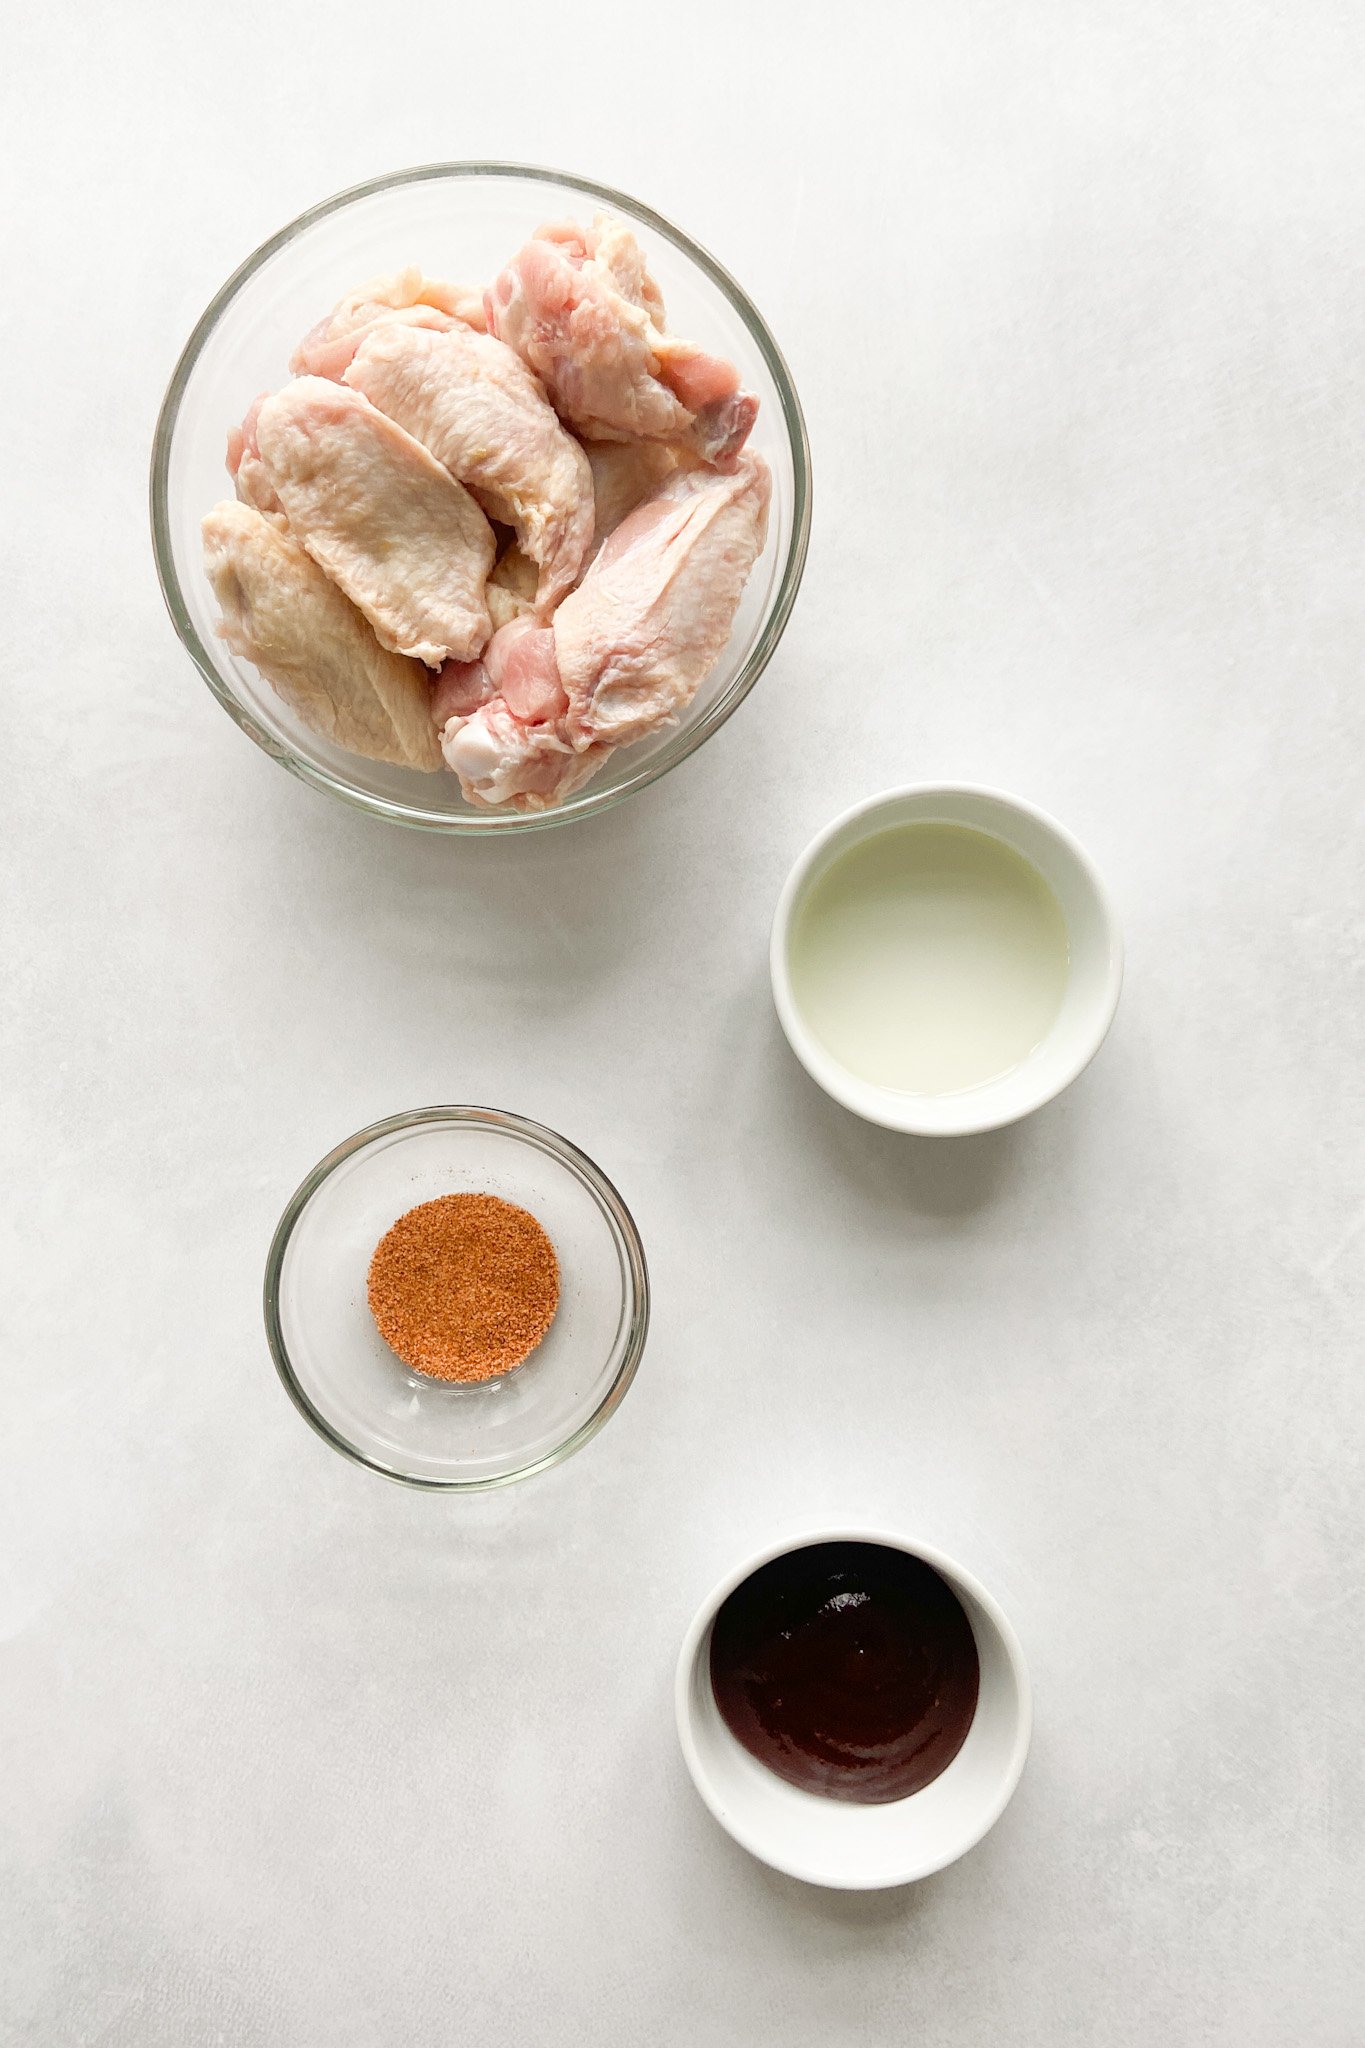 Ingredients to make chicken wings. Specifics provided in recipe card.